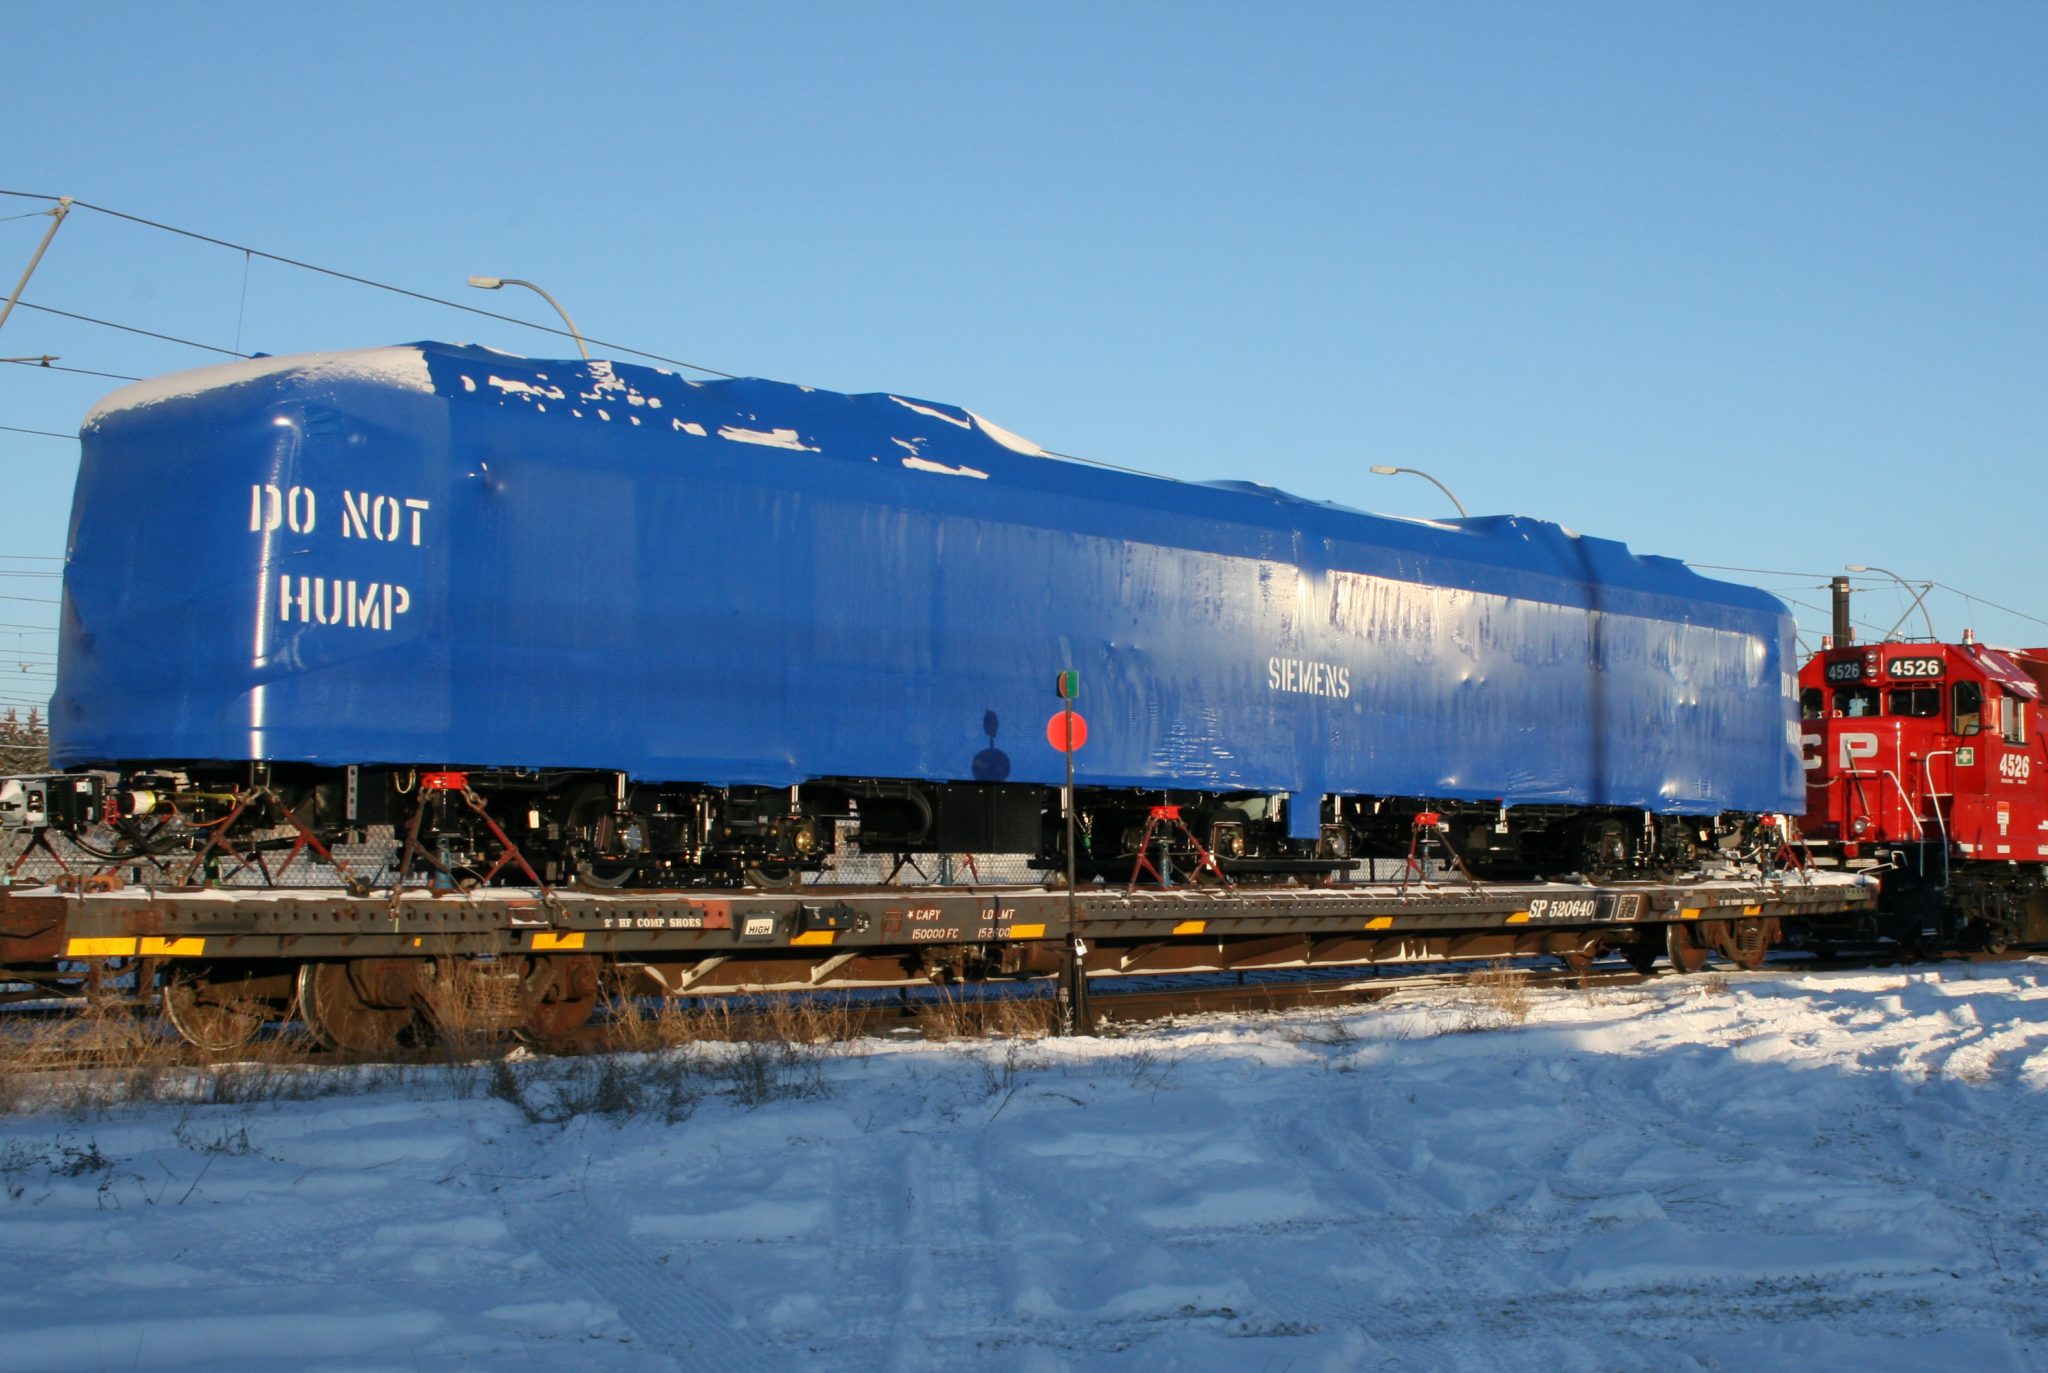 The first of the S200’s are delivered to Anderson Garage via the Canadian Pacific Railway. (January 8, 2016)